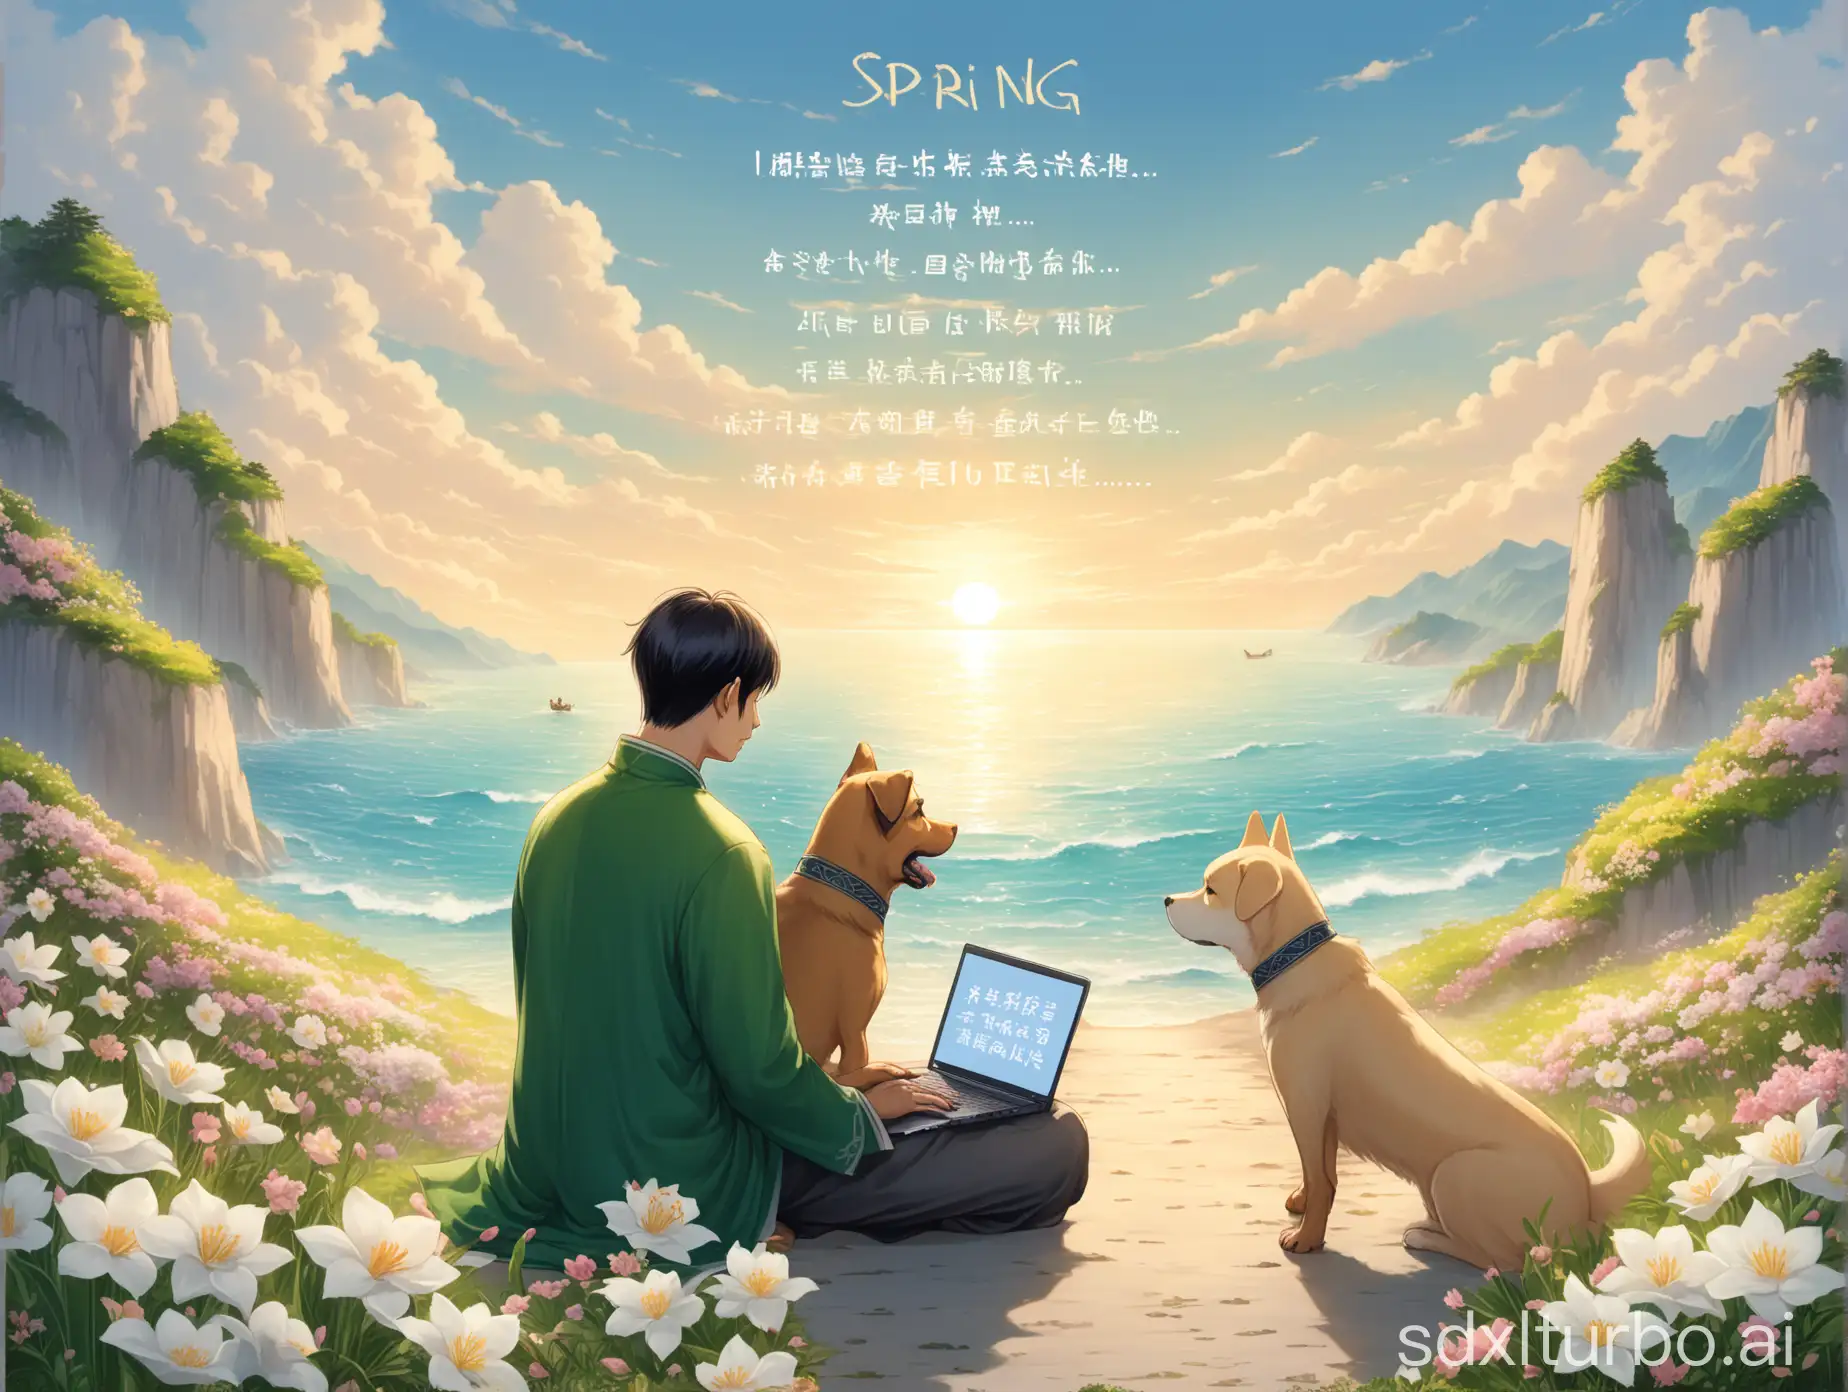 Asian man, laptop, two types of dogs, spring is warm and flowers are blooming, facing the sea, huge text on the sea 'self-discipline, calmness, development, embrace ambition'